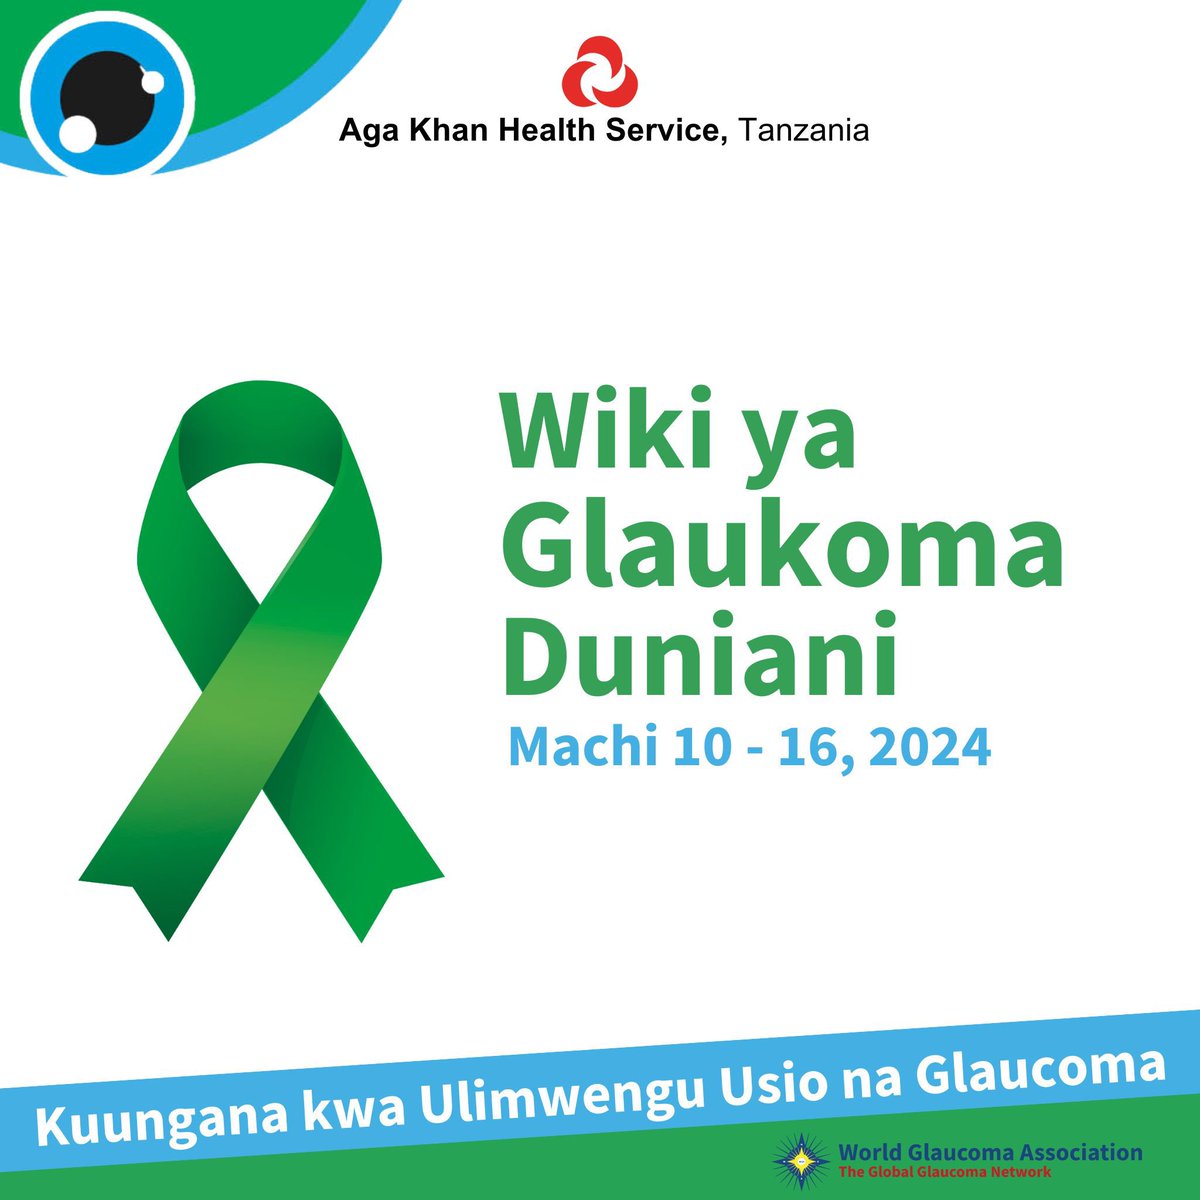 This week we join our global partners to celebrate World Glaucoma Week, we unite to spread awareness about glaucoma and championing early sight testing. 

#agakhanhospitaldsm #glaucomaweek #glaucoma #unitingforglaucoma #freeworld #specialoffer #discount #eyetest #tanzania